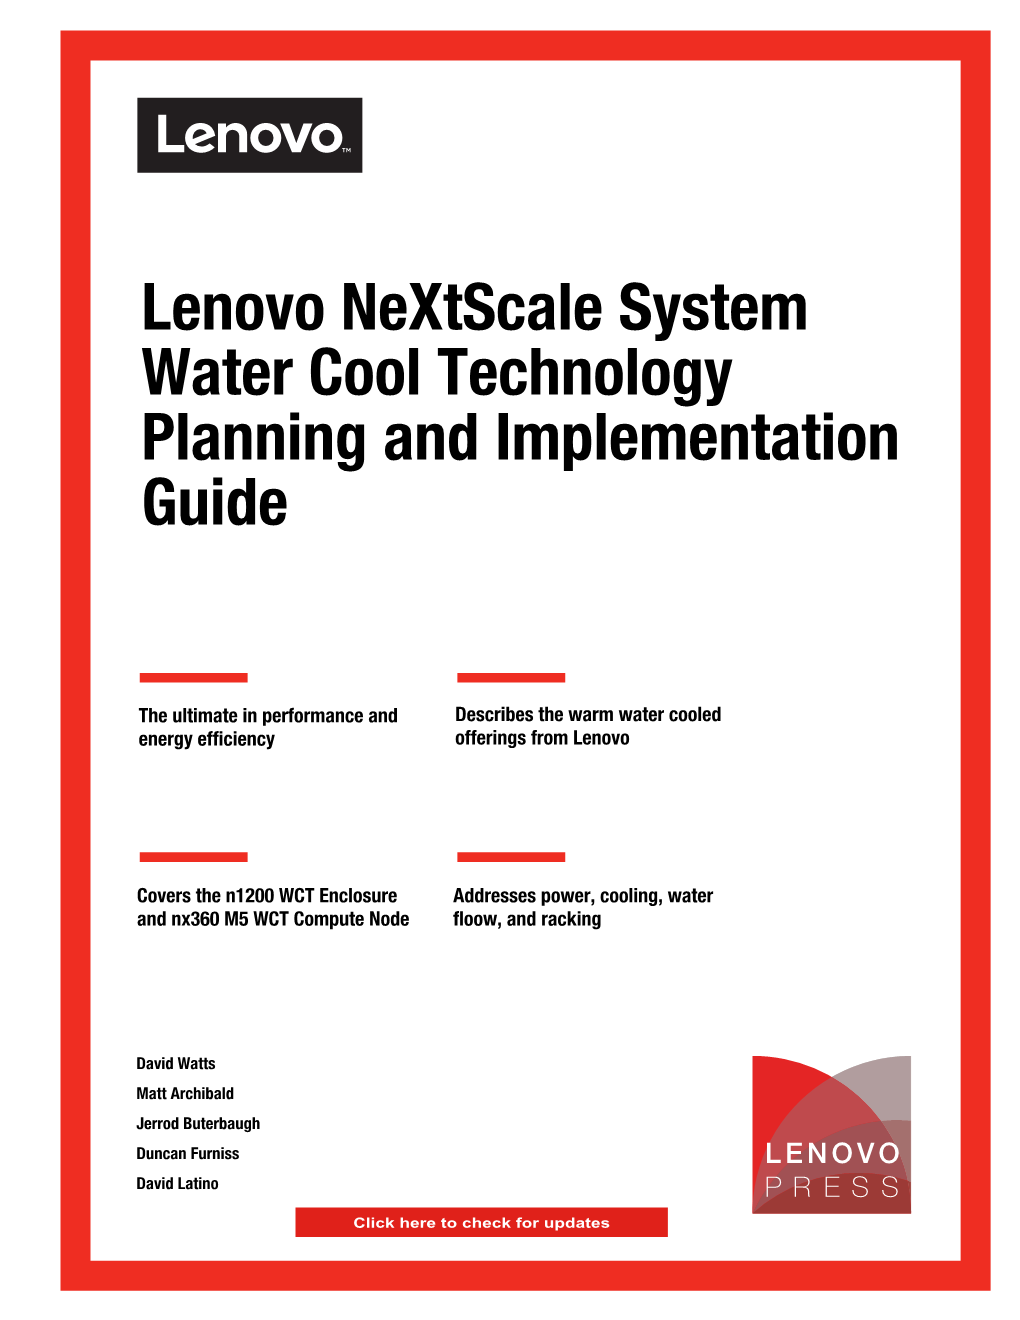 Lenovo Nextscale System Water Cool Technology Planning and Implementation Guide